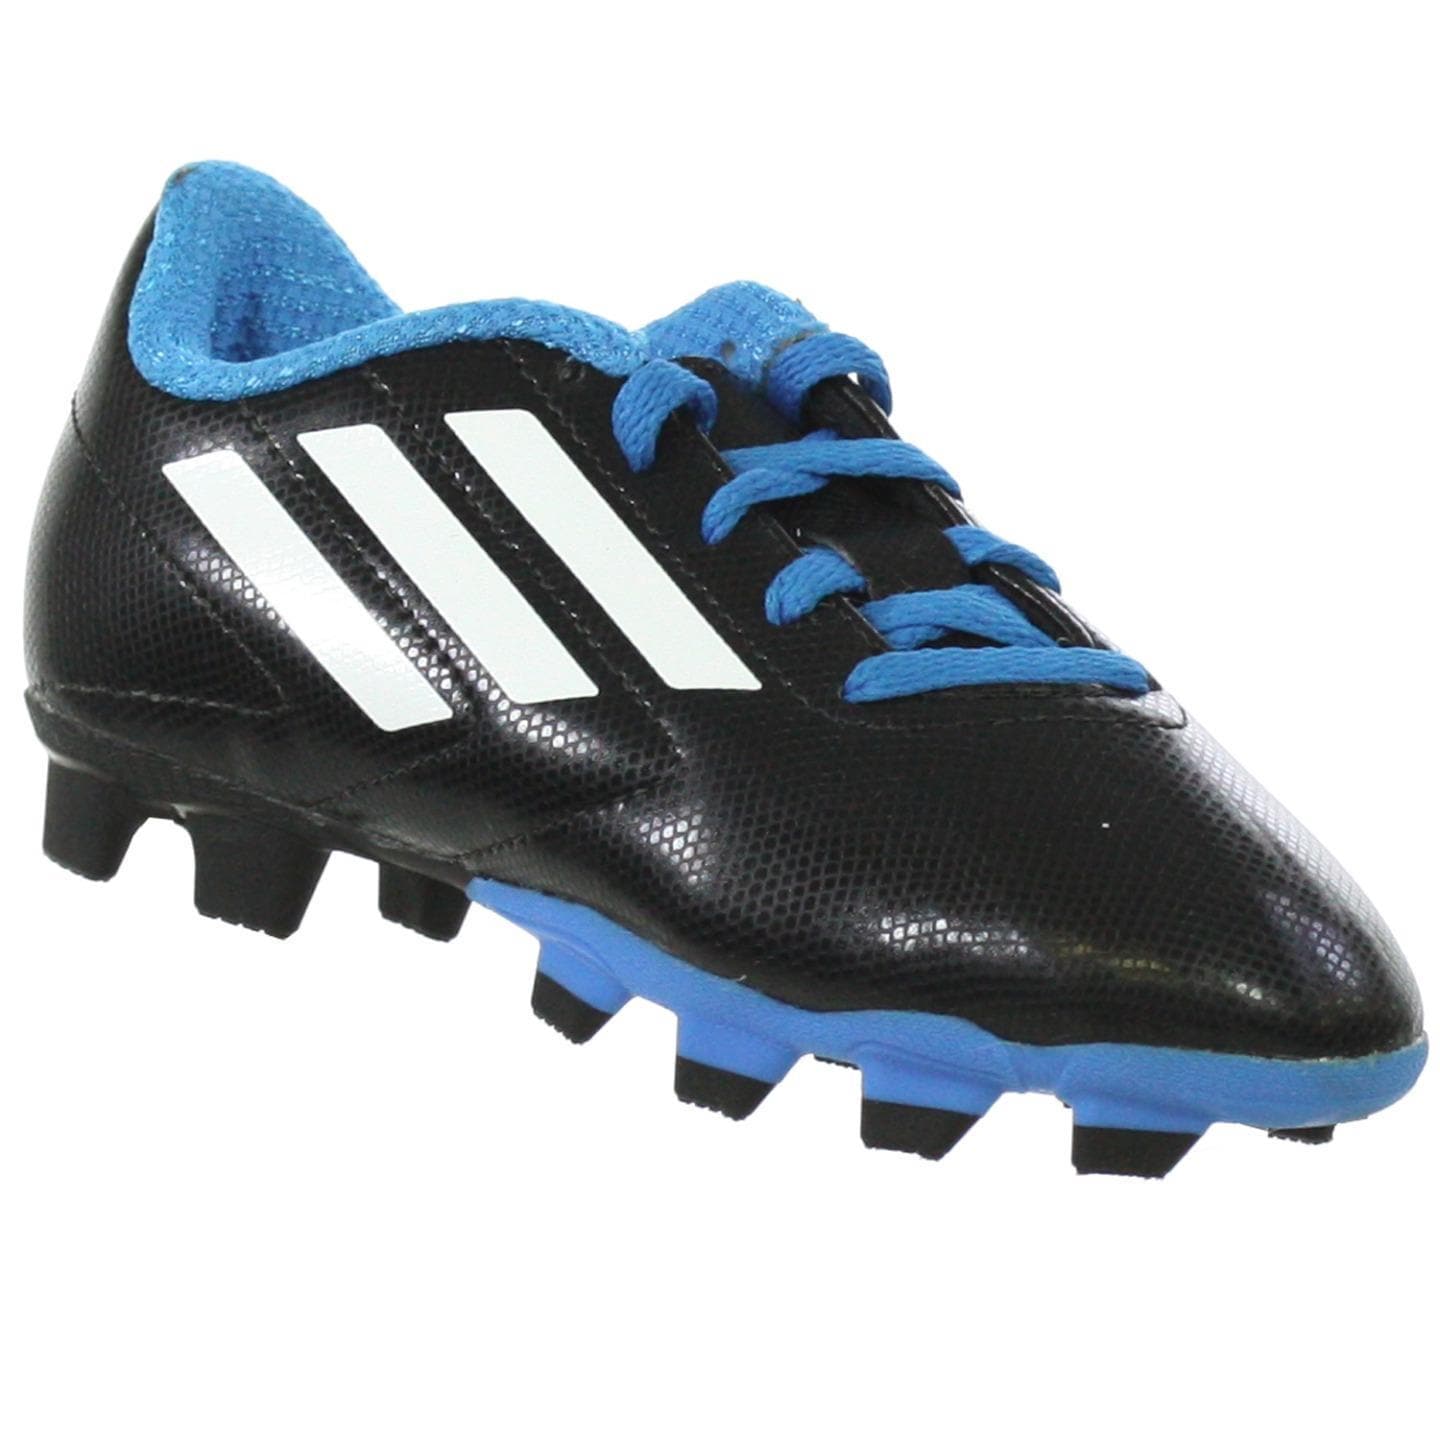 adidas soccer cleats on sale